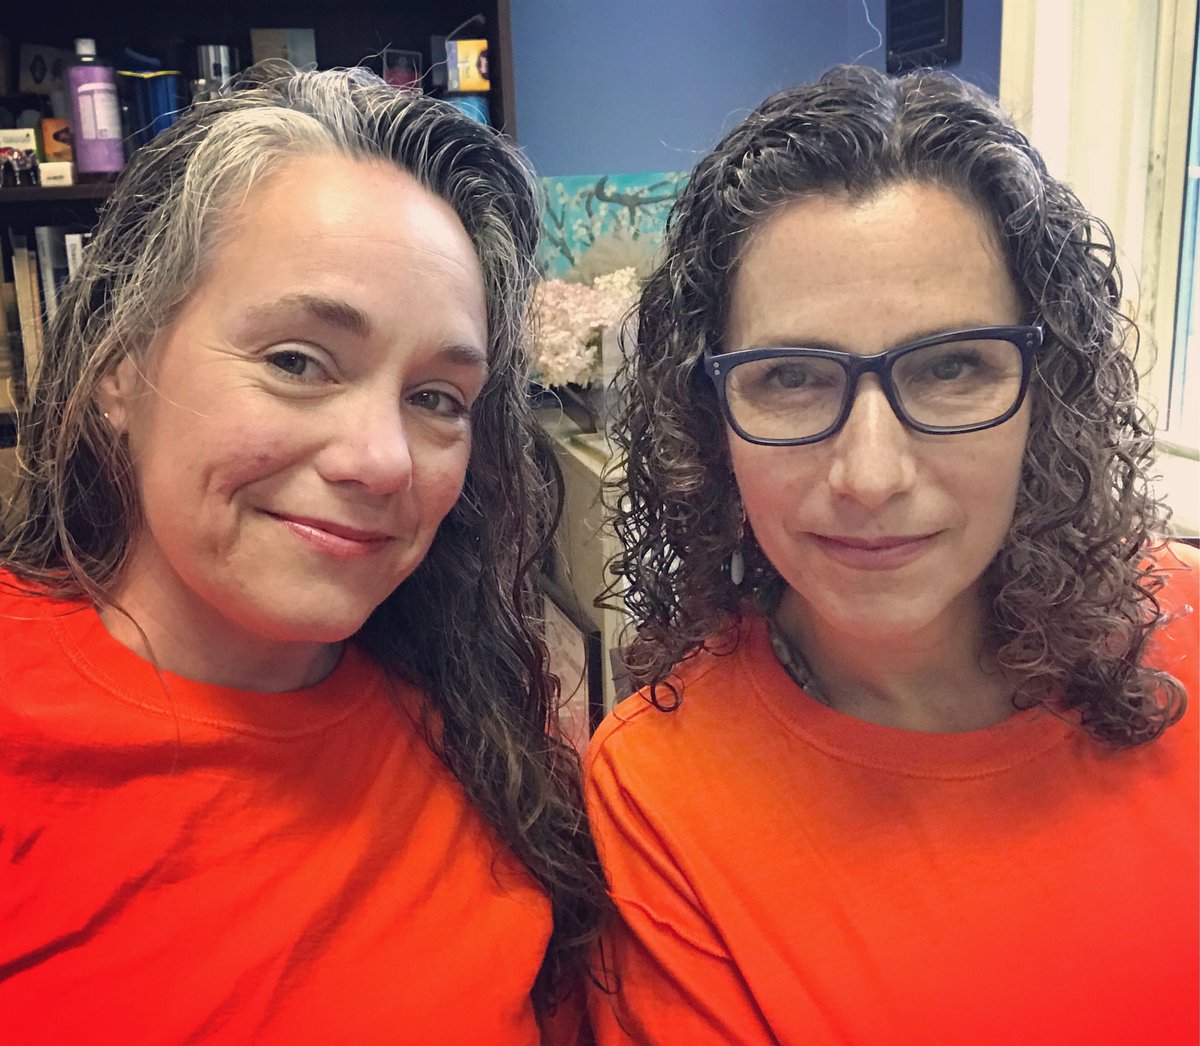 We #wearorange for the next generation in Ossining and in all communities. Please join us to take action. Visit Moms Demand Action for Gun Sense in America. To attend a rally in the area, visit act.everytown.org/event/wear-ora…. Let’s stand together for our youth.